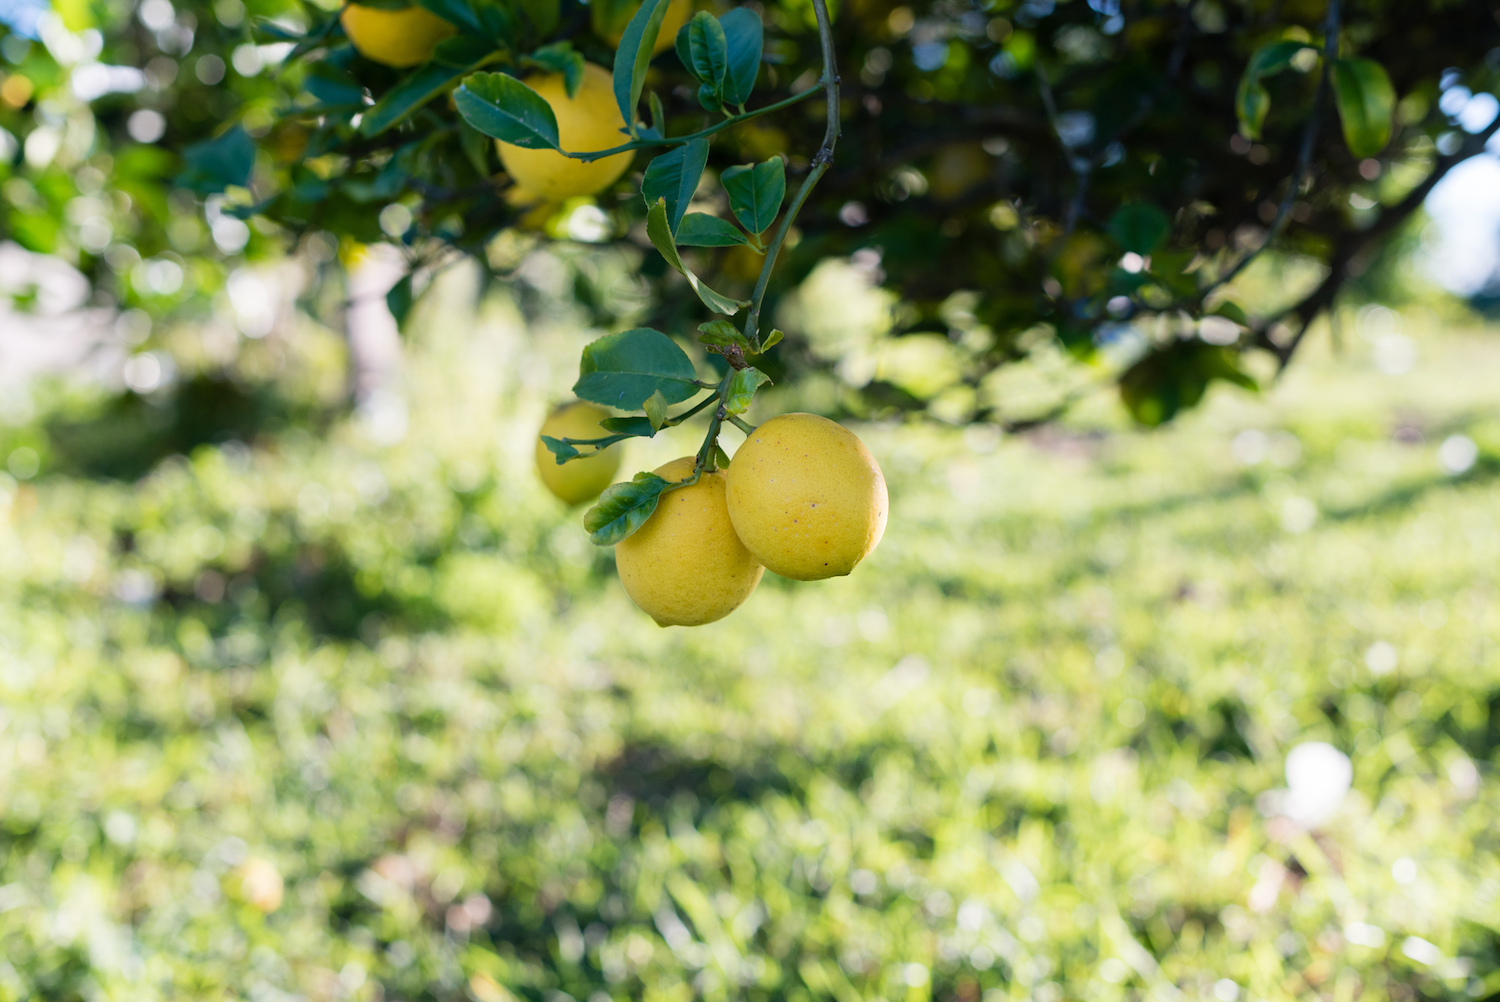 How to Grow and Care for Lemon Trees